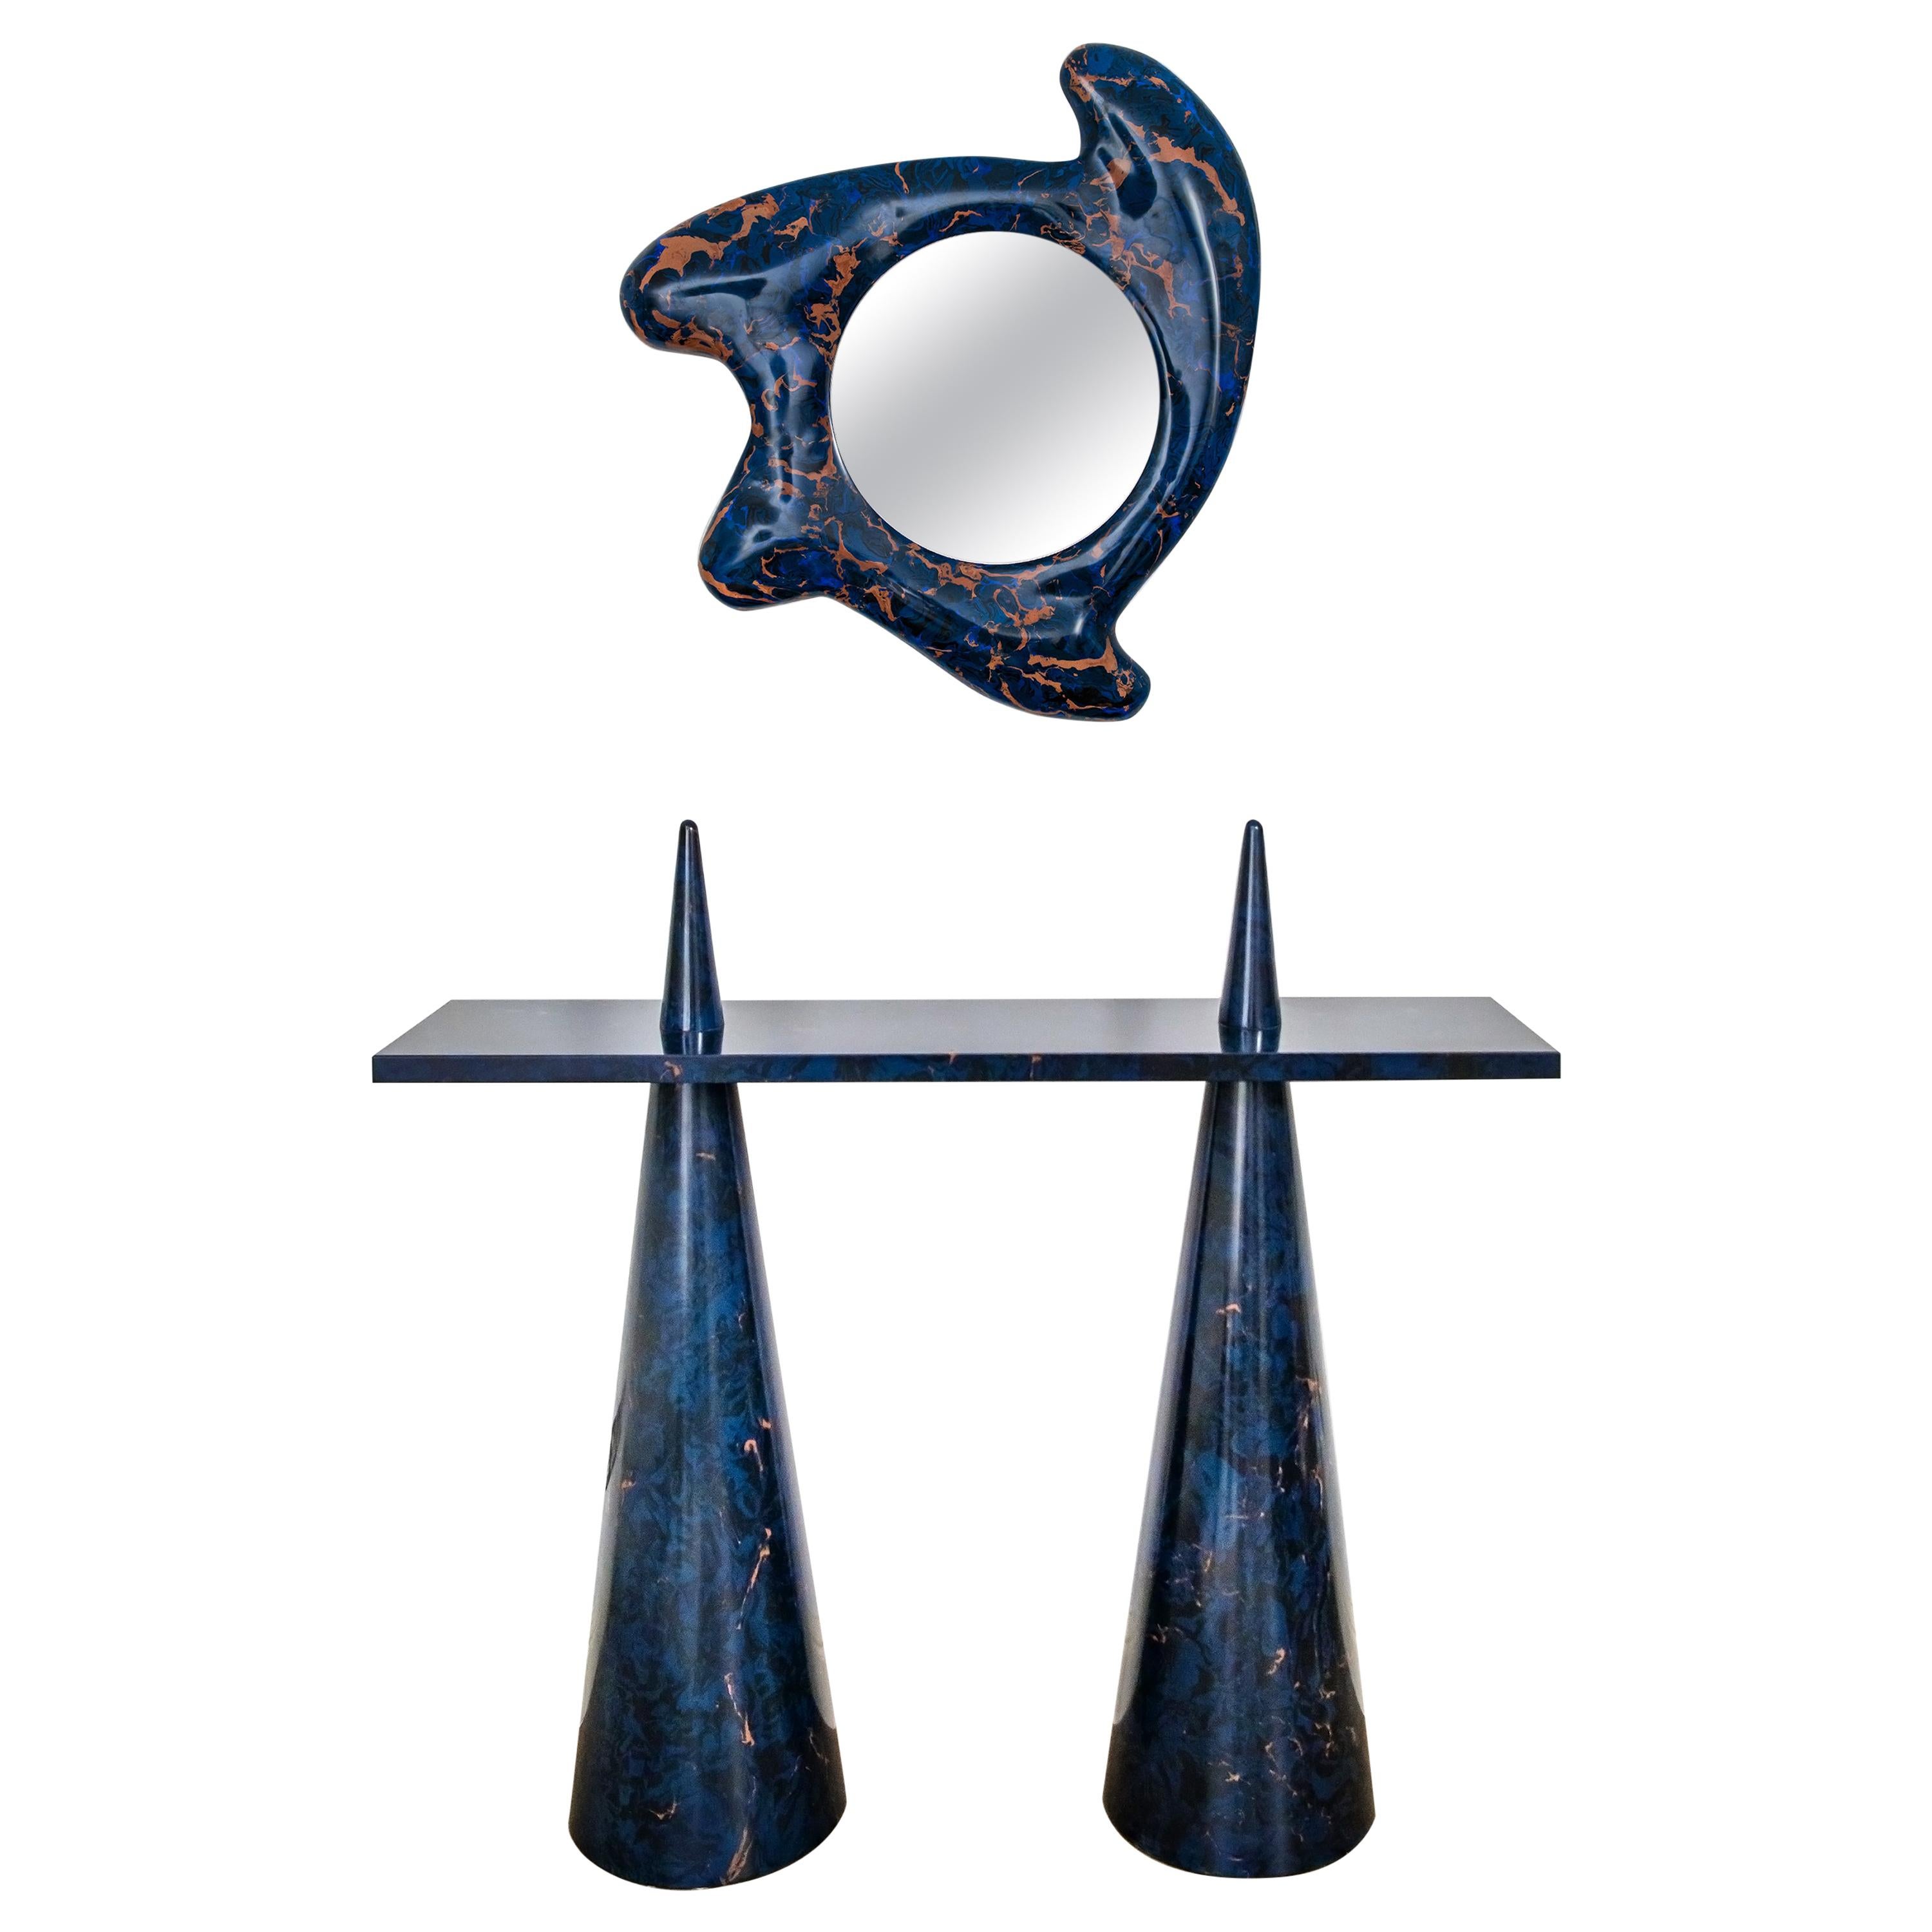  Console table & mirror sculptural set. One of a kind.  Hand crafted For Sale